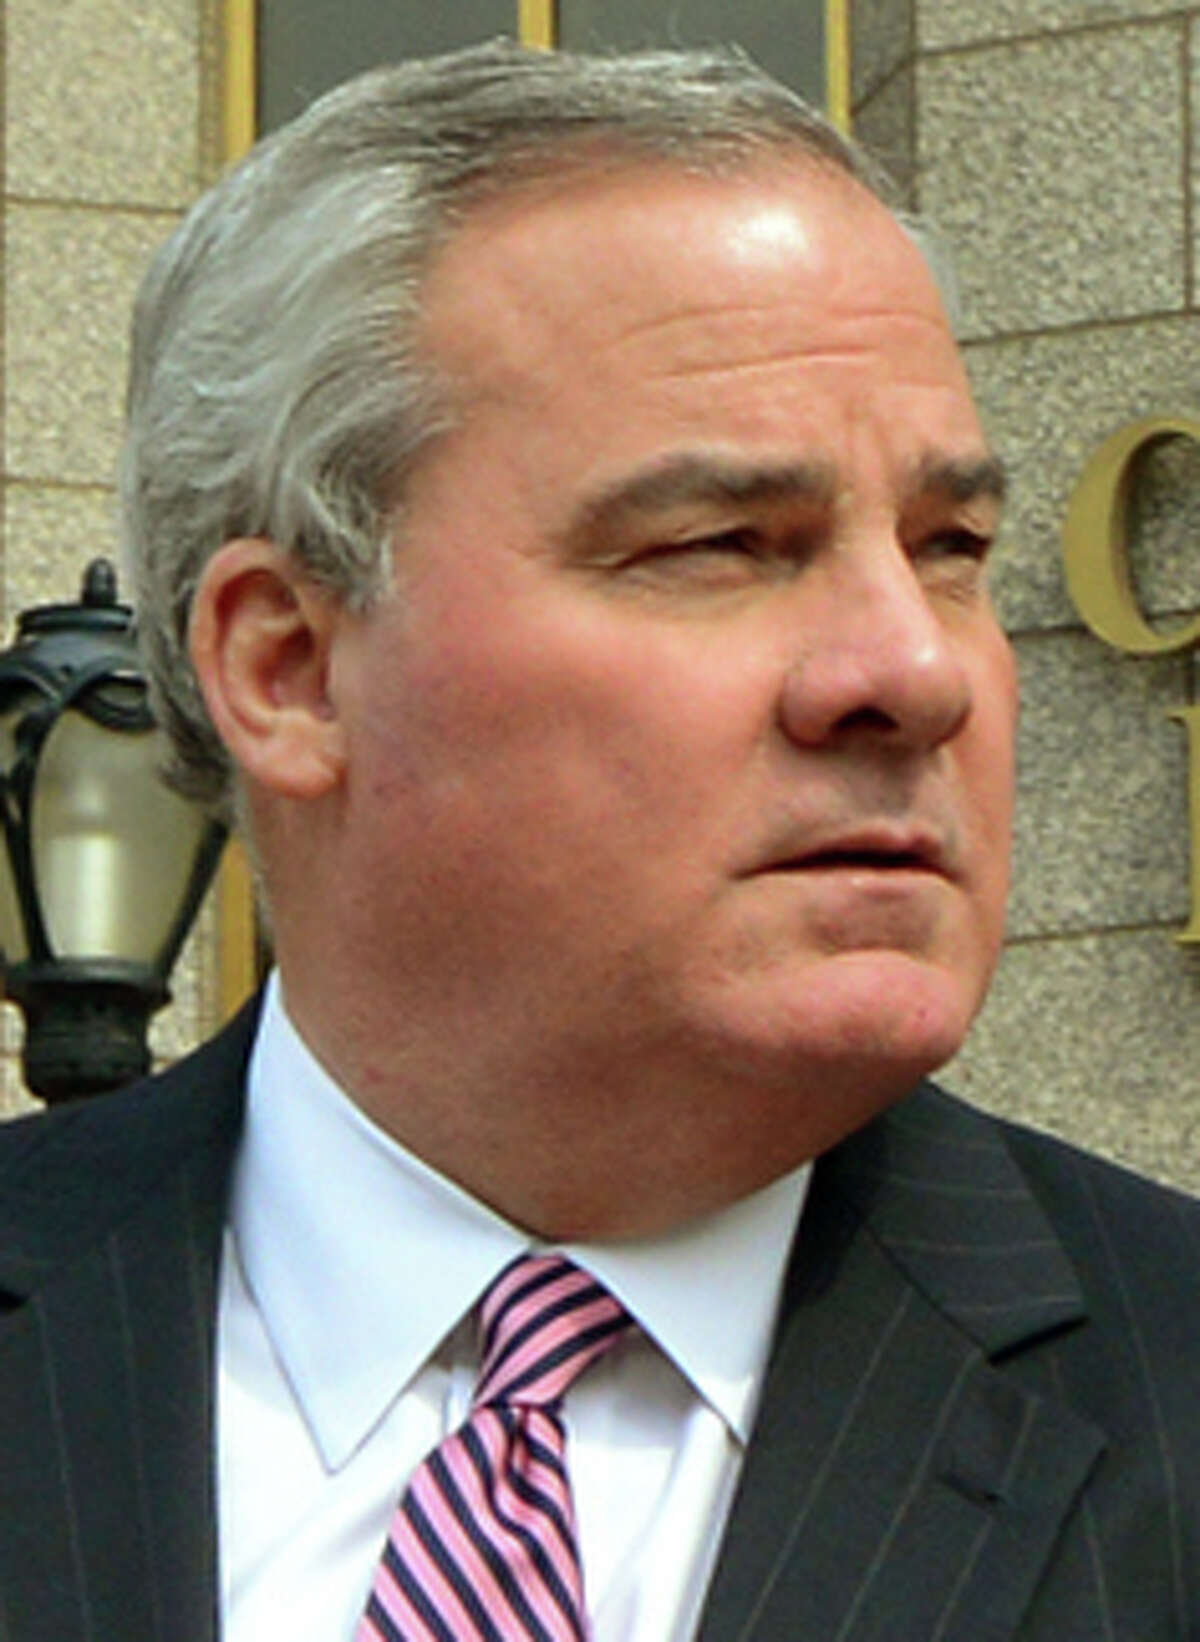 Former Connecticut Governor John Rowland leaves with his lawyer Kaitlin A. Halloran, Esq. outside the Connecticut Financial and Bank of America building in downtown New Haven, Conn. on Friday April 11, 2014. Earlier Rowland plead not guilty after being indicted at the federal courthouse next door.